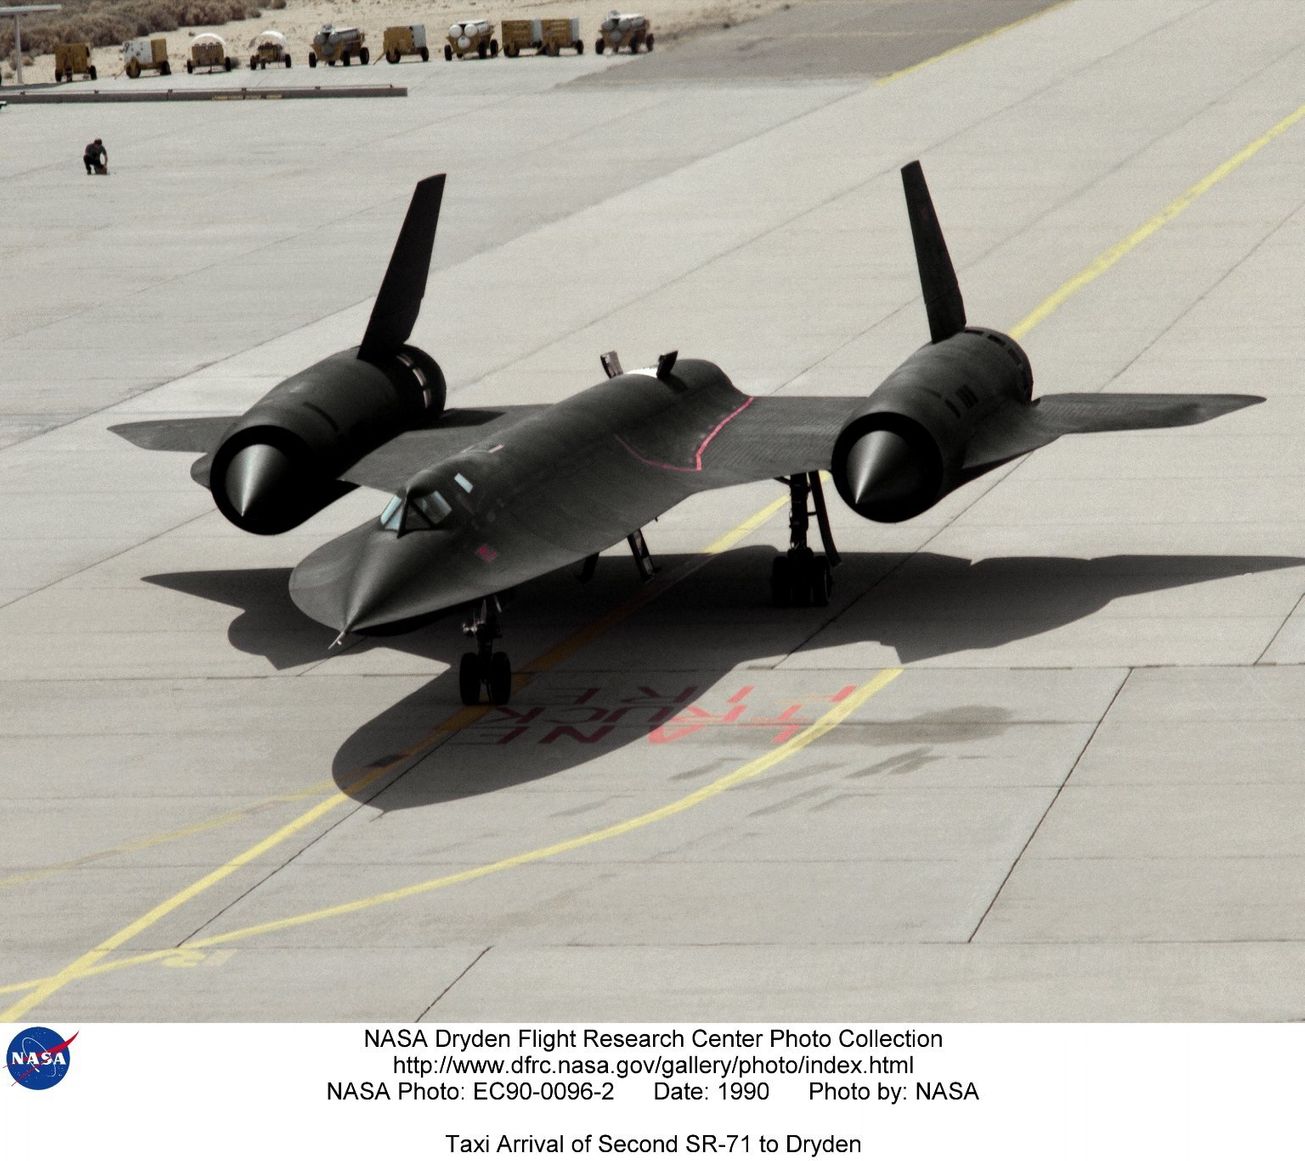 Lost Opportunity: Why The Mach 3 Sr-71 Spy Plane Was Never Made Into A  Bomber | The National Interest